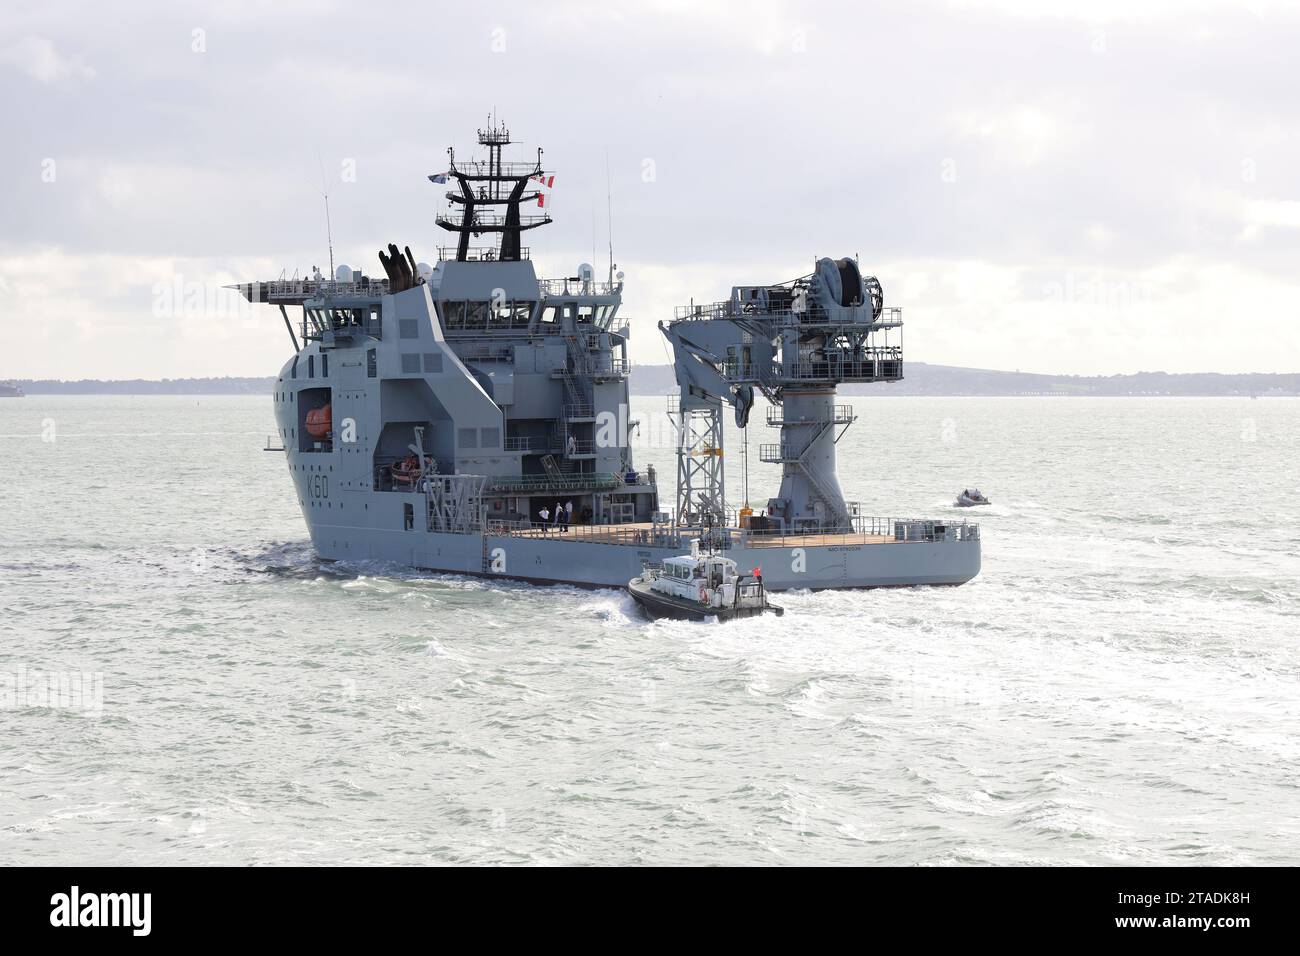 The Admiralty pilot’s launch stays close to the stern of the Royal Fleet Auxiliary’s latest ship RFA PROTEUS as the vessel heads into The Solent Stock Photo